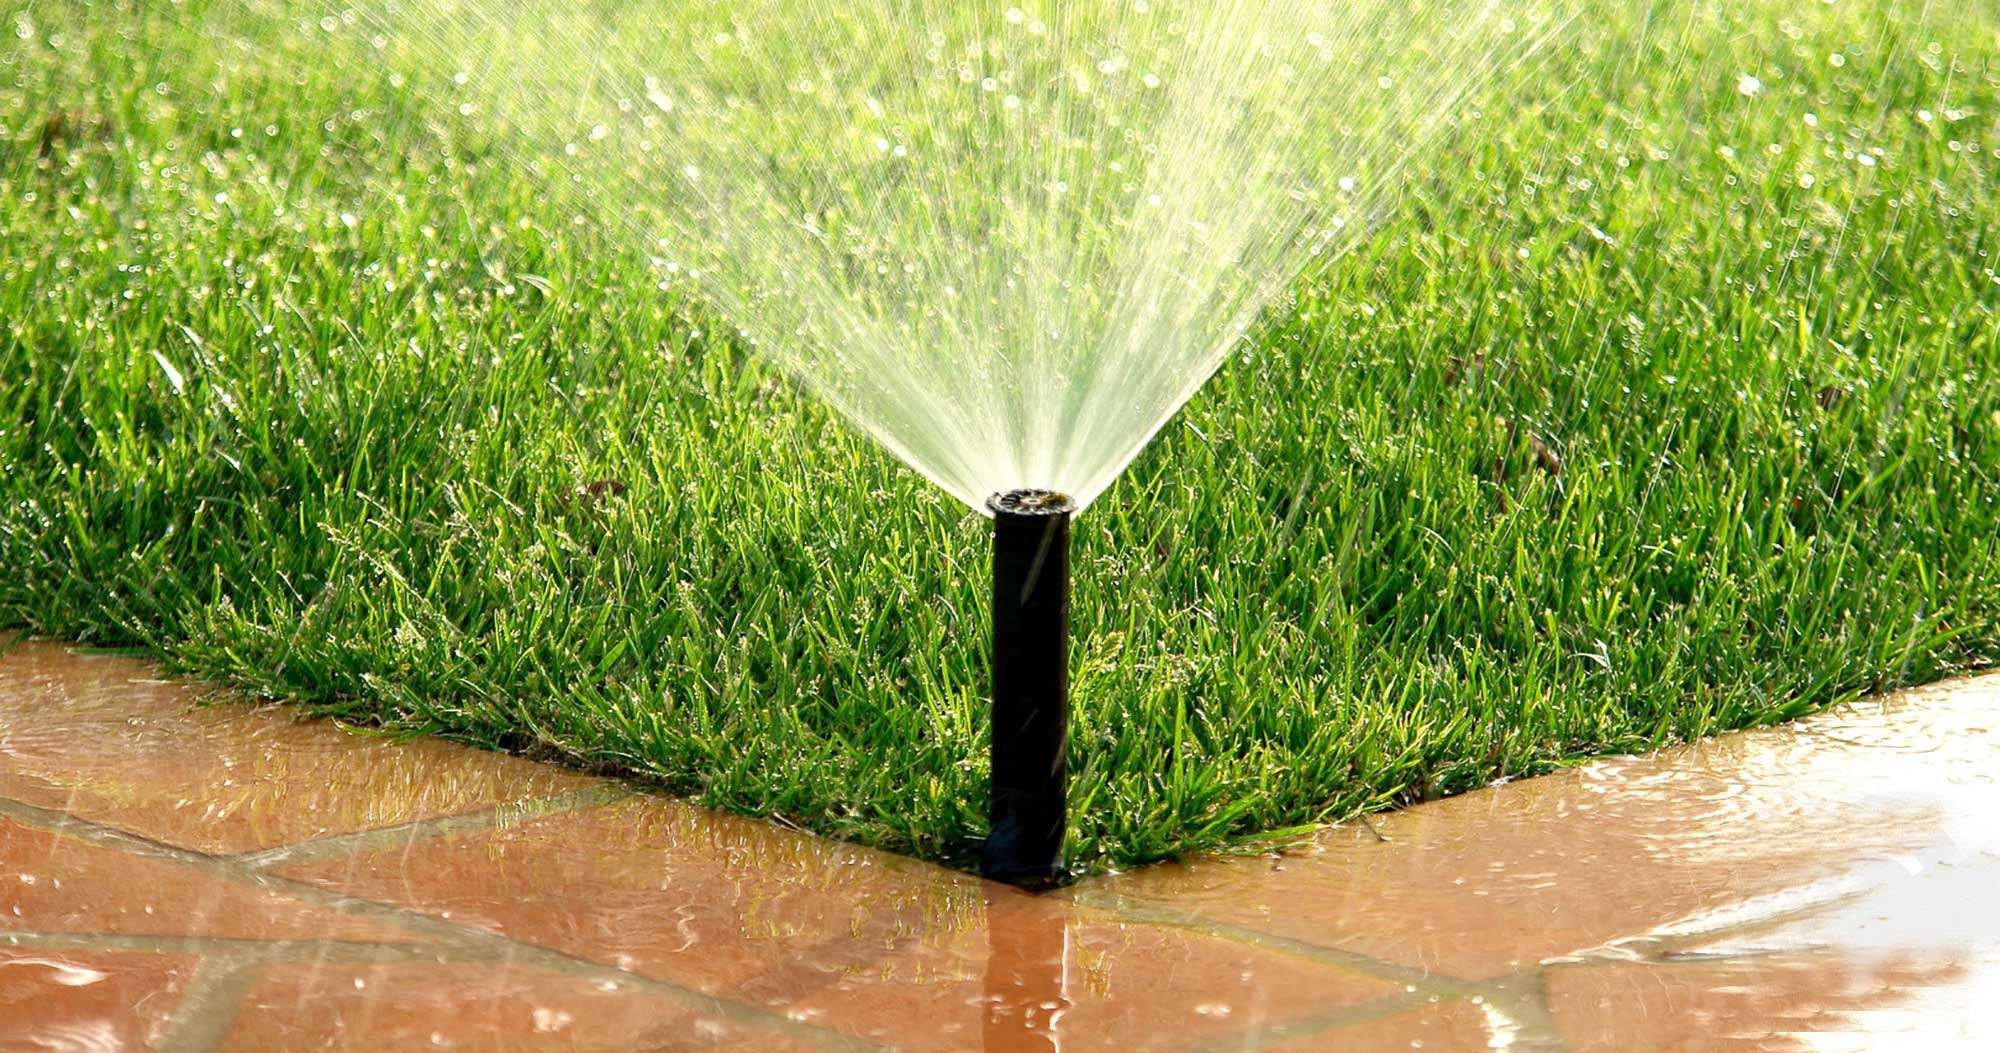 How To Install A Garden Sprinkler System Within Your Home?